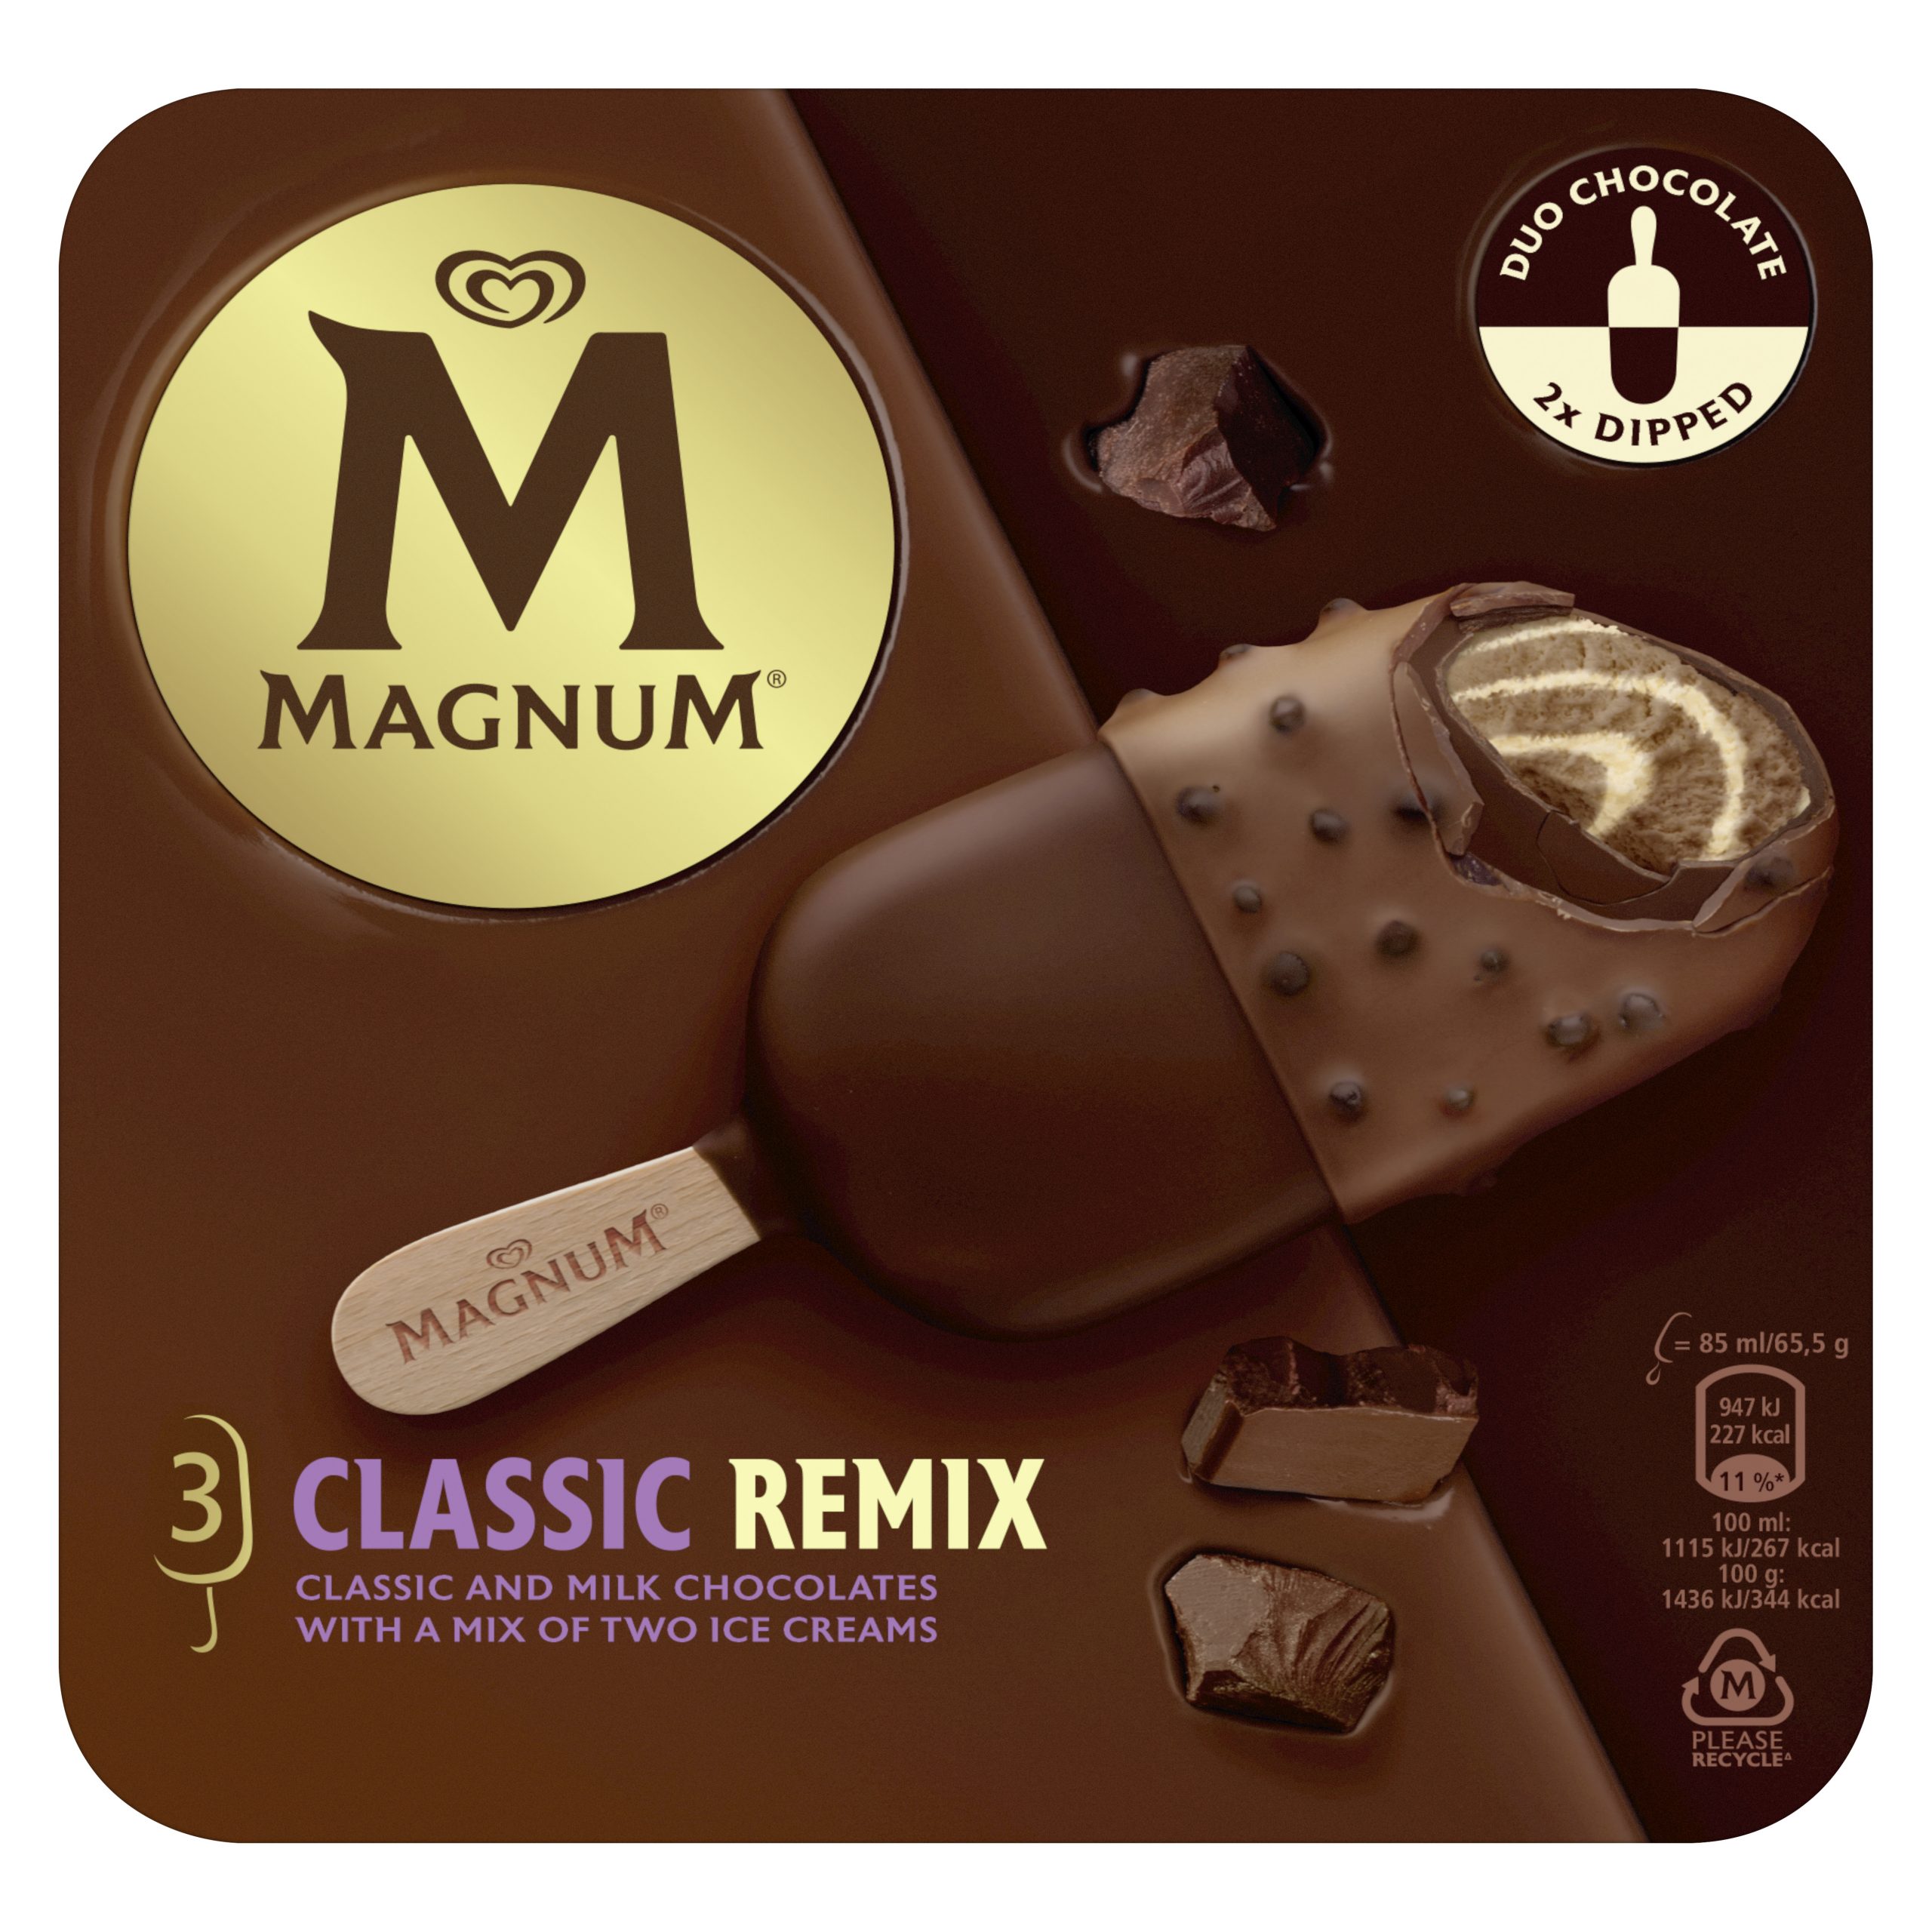 Magnum launches Magnum Remix versions of their much-loved classics